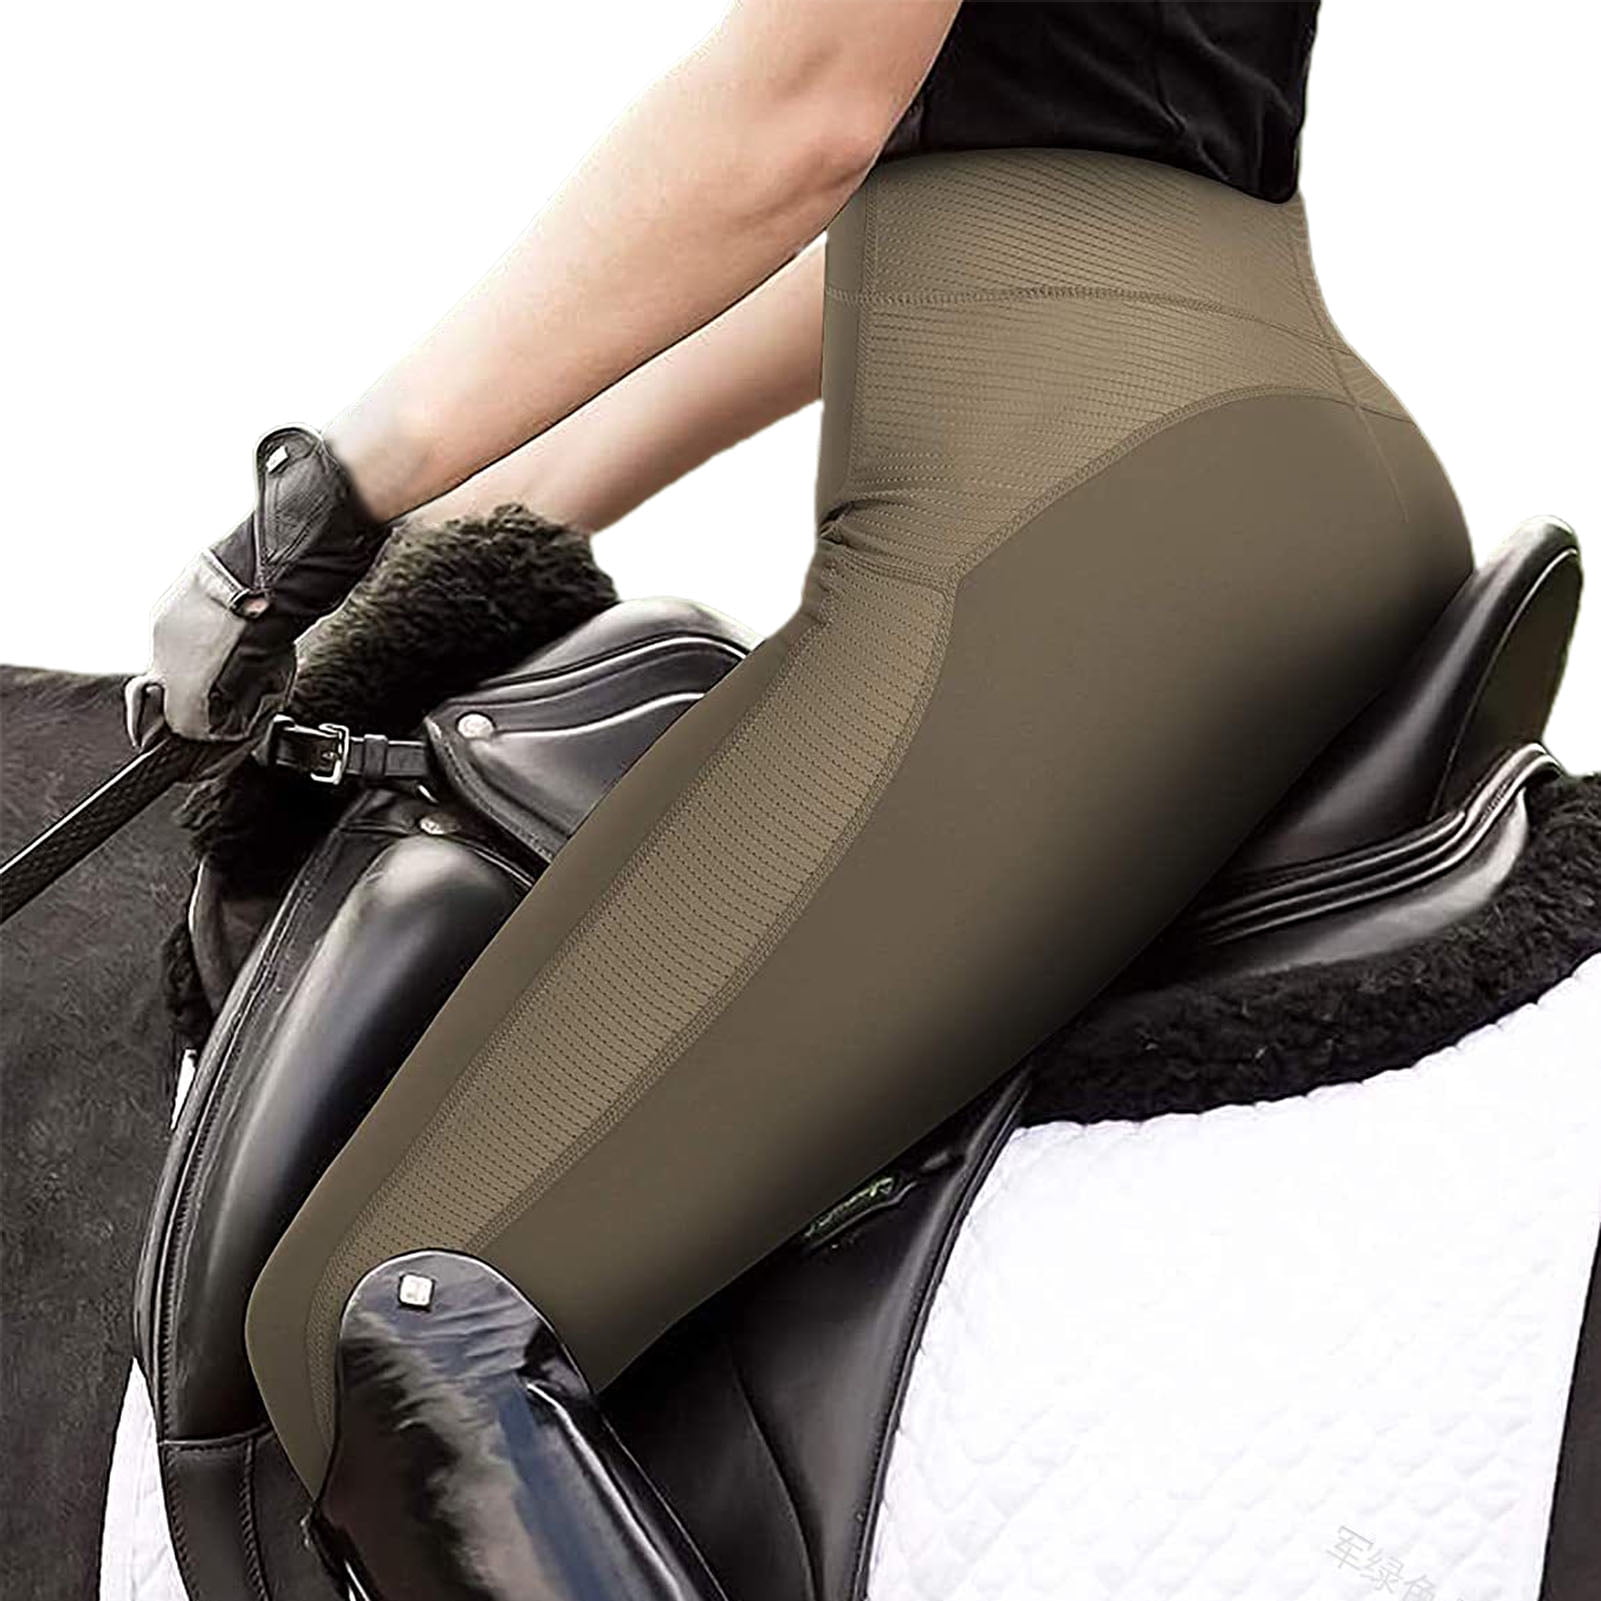 Women's Horse Riding Pants Breeches Exercise High Waist Sports Riding Equestrian Trousers Comfort & Style 